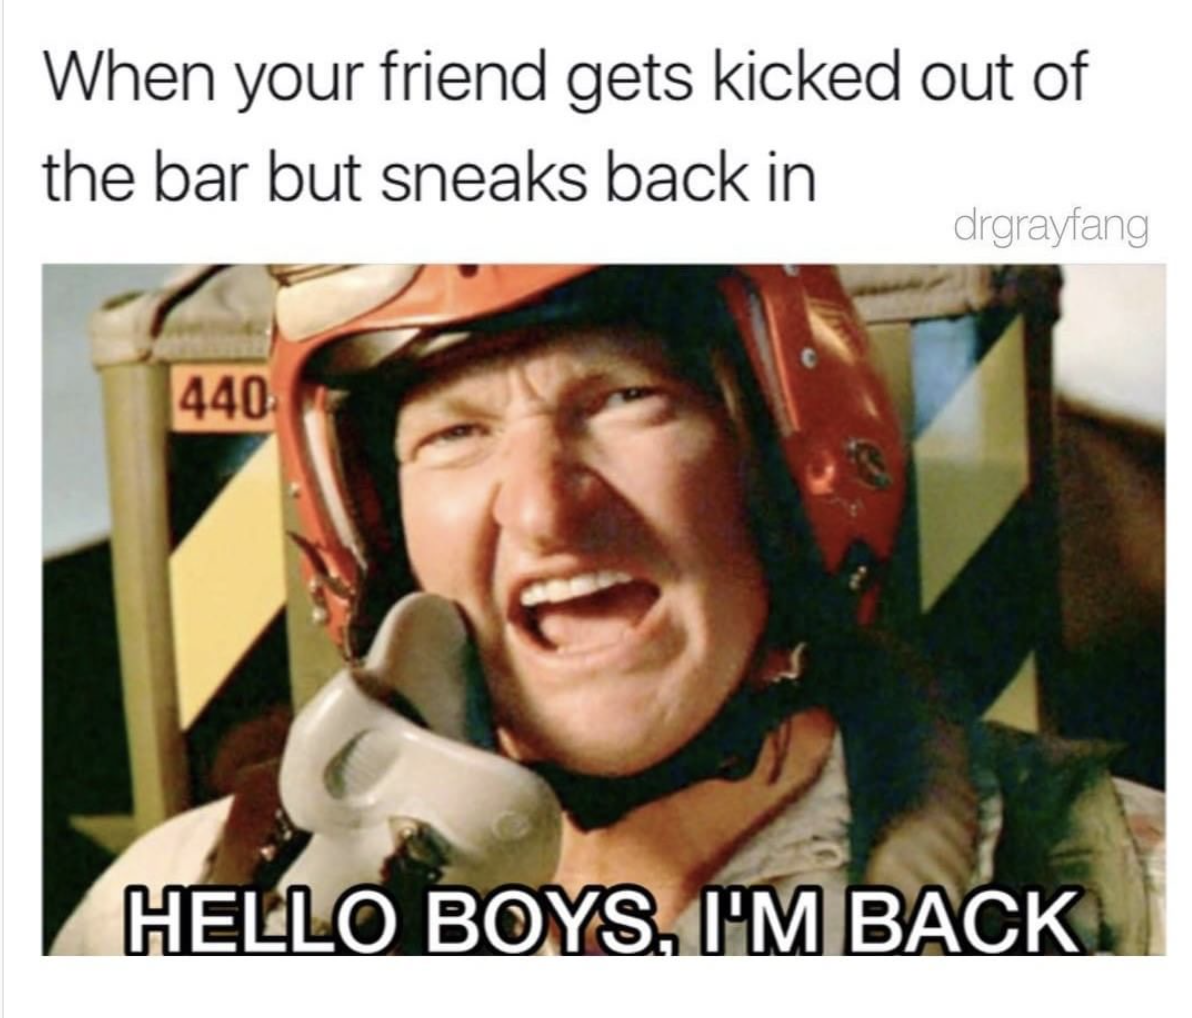 Dennis Quaid HELLO BOYS I AM BACK meme about when friend gets kicked out of the bar but sneaks back in.